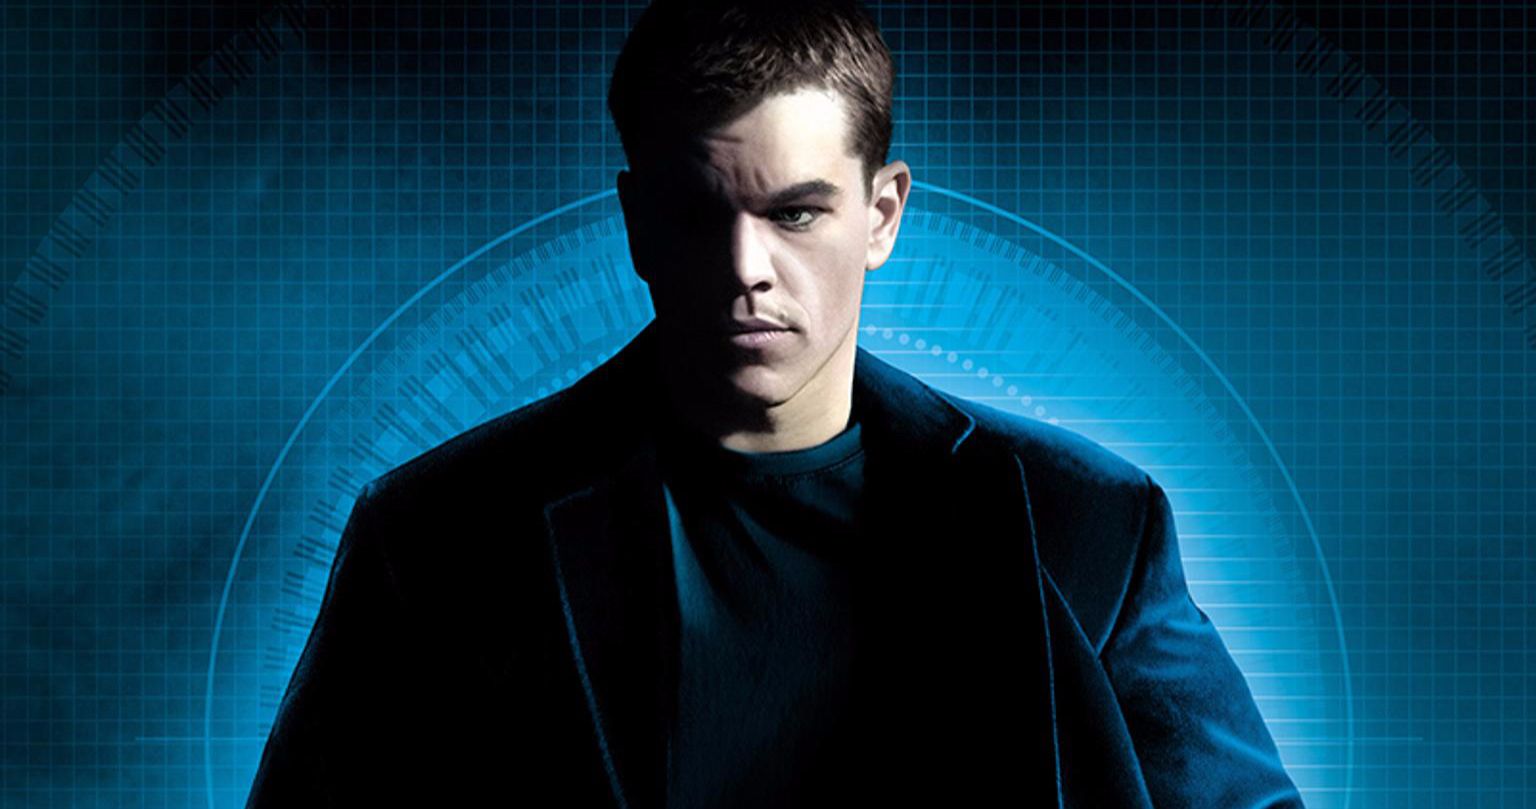 Jason Bourne Fans Are Celebrating The Bourne Supremacy 16th Anniversary on Twitter